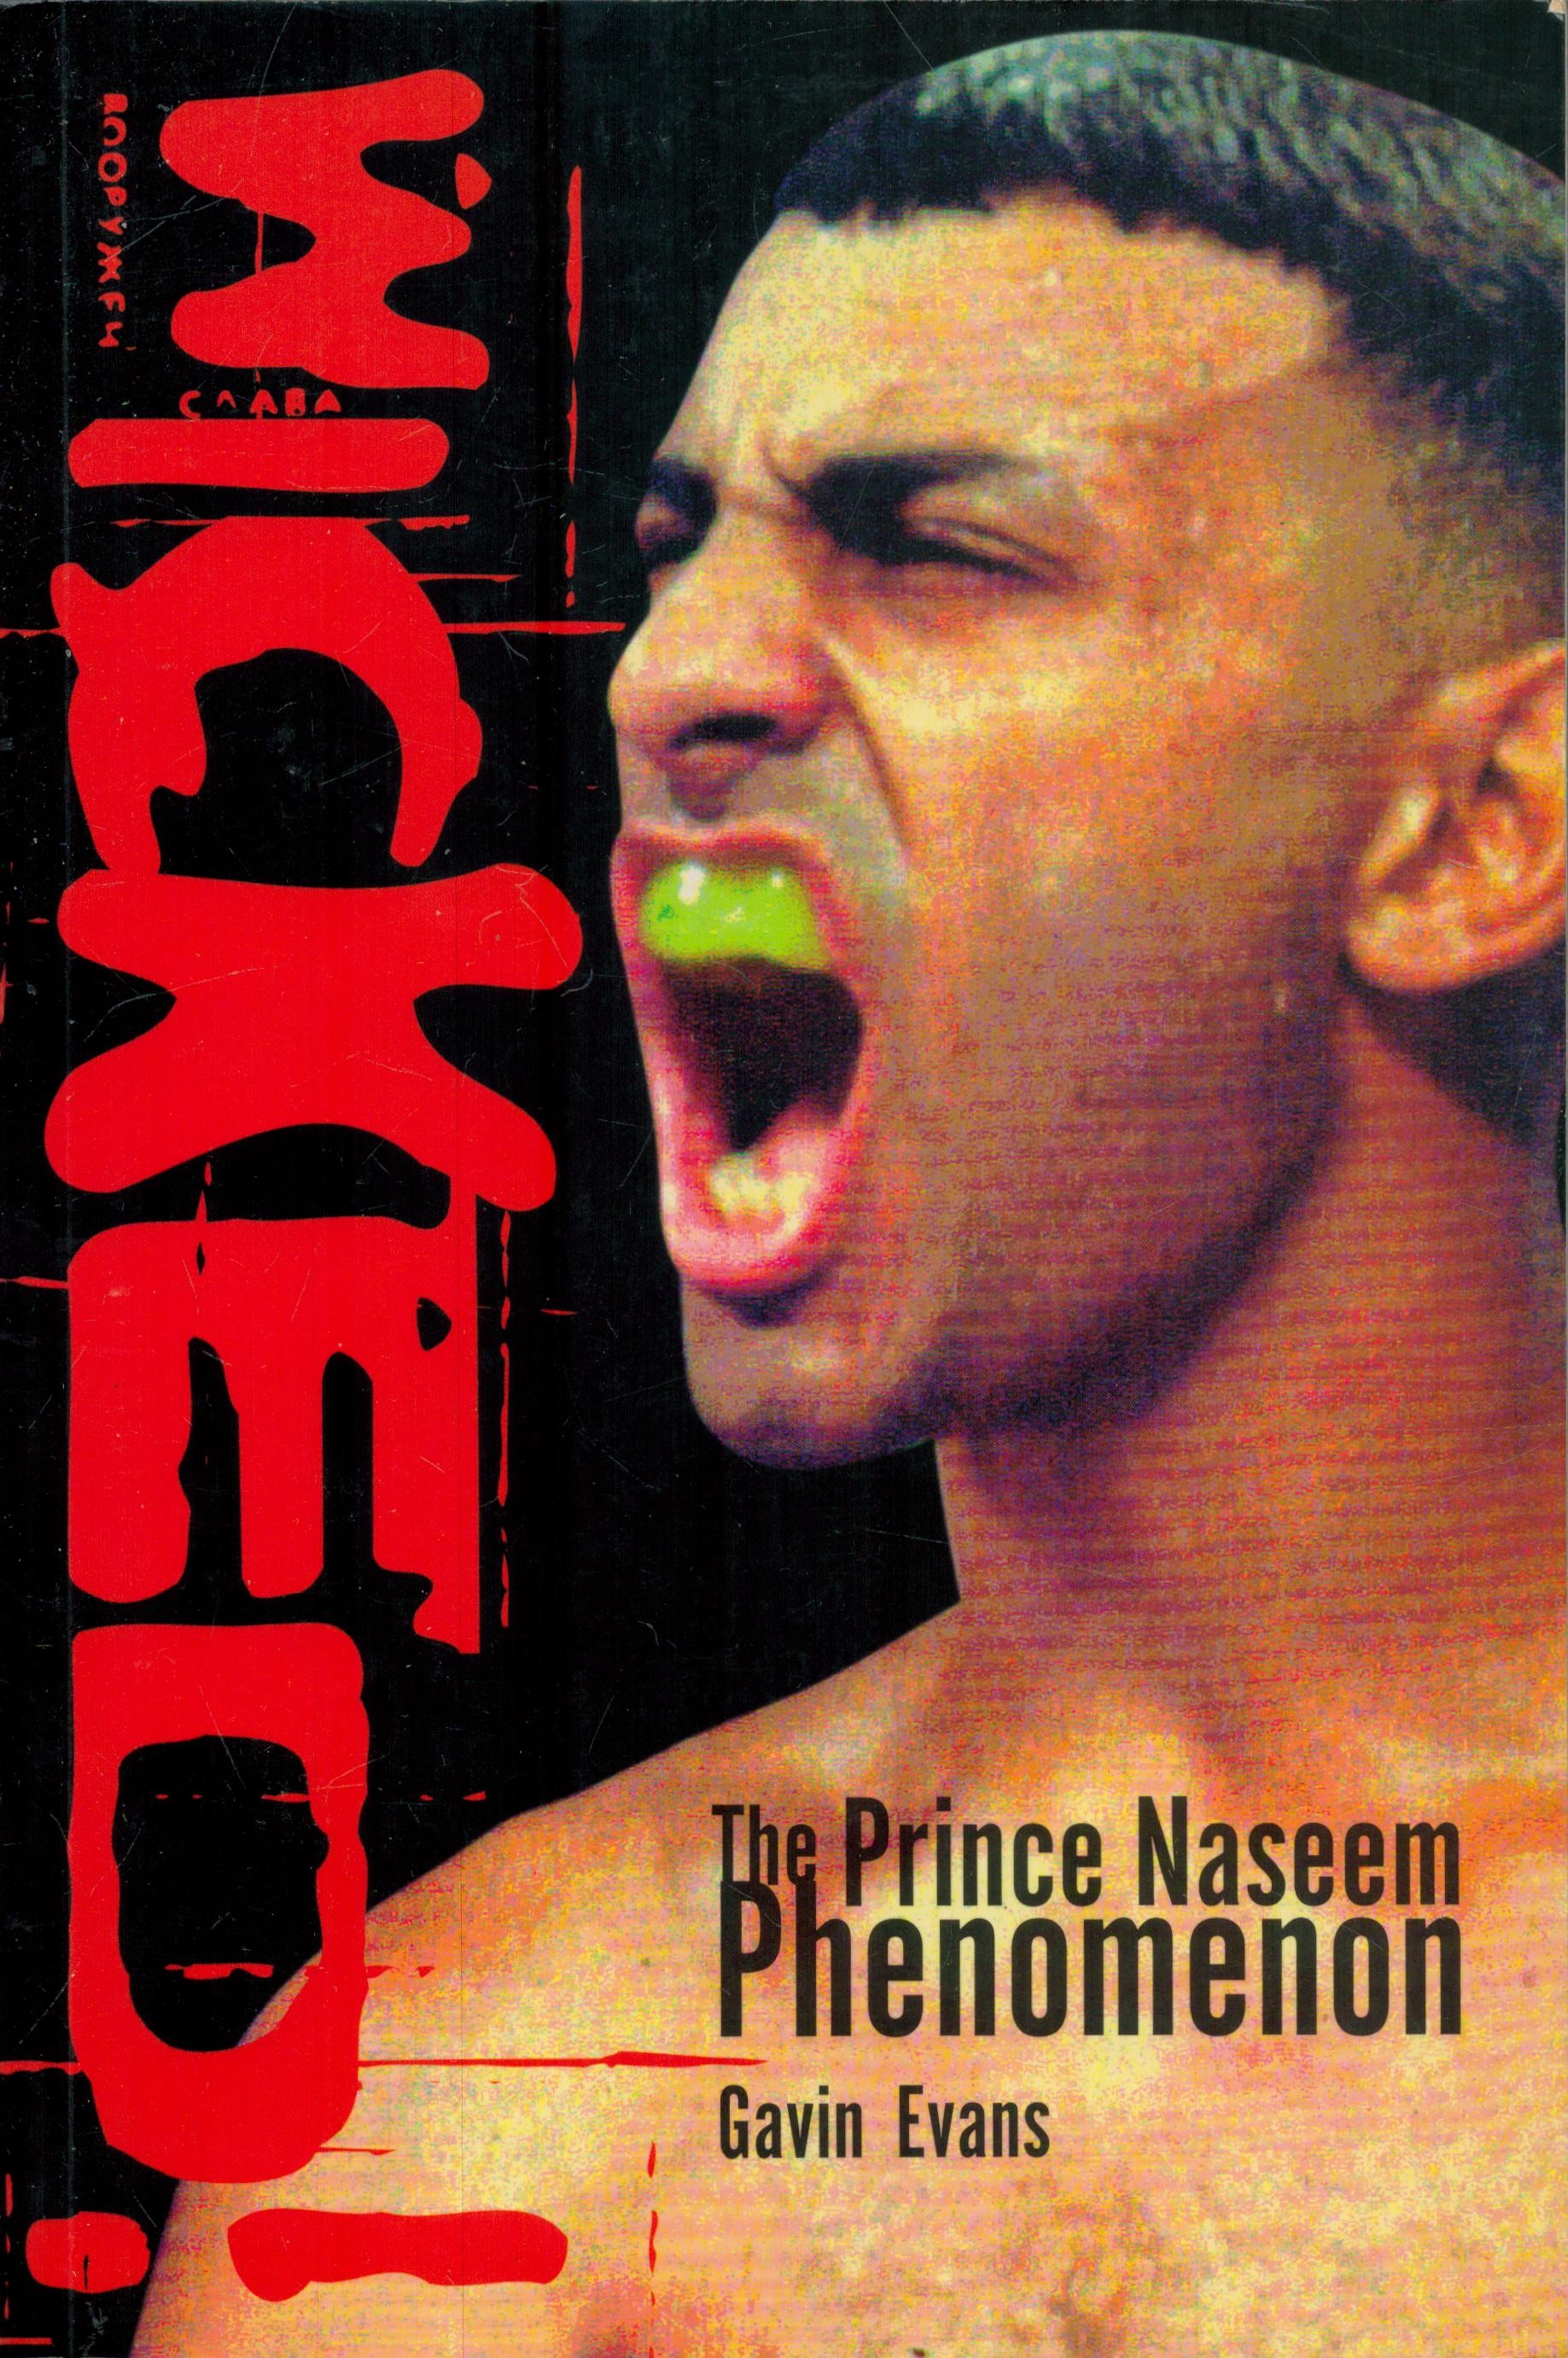 Wicked! The Prince Naseem Phenomenon Gavin Evans Paperback book, 313 pages. Good Condition. All